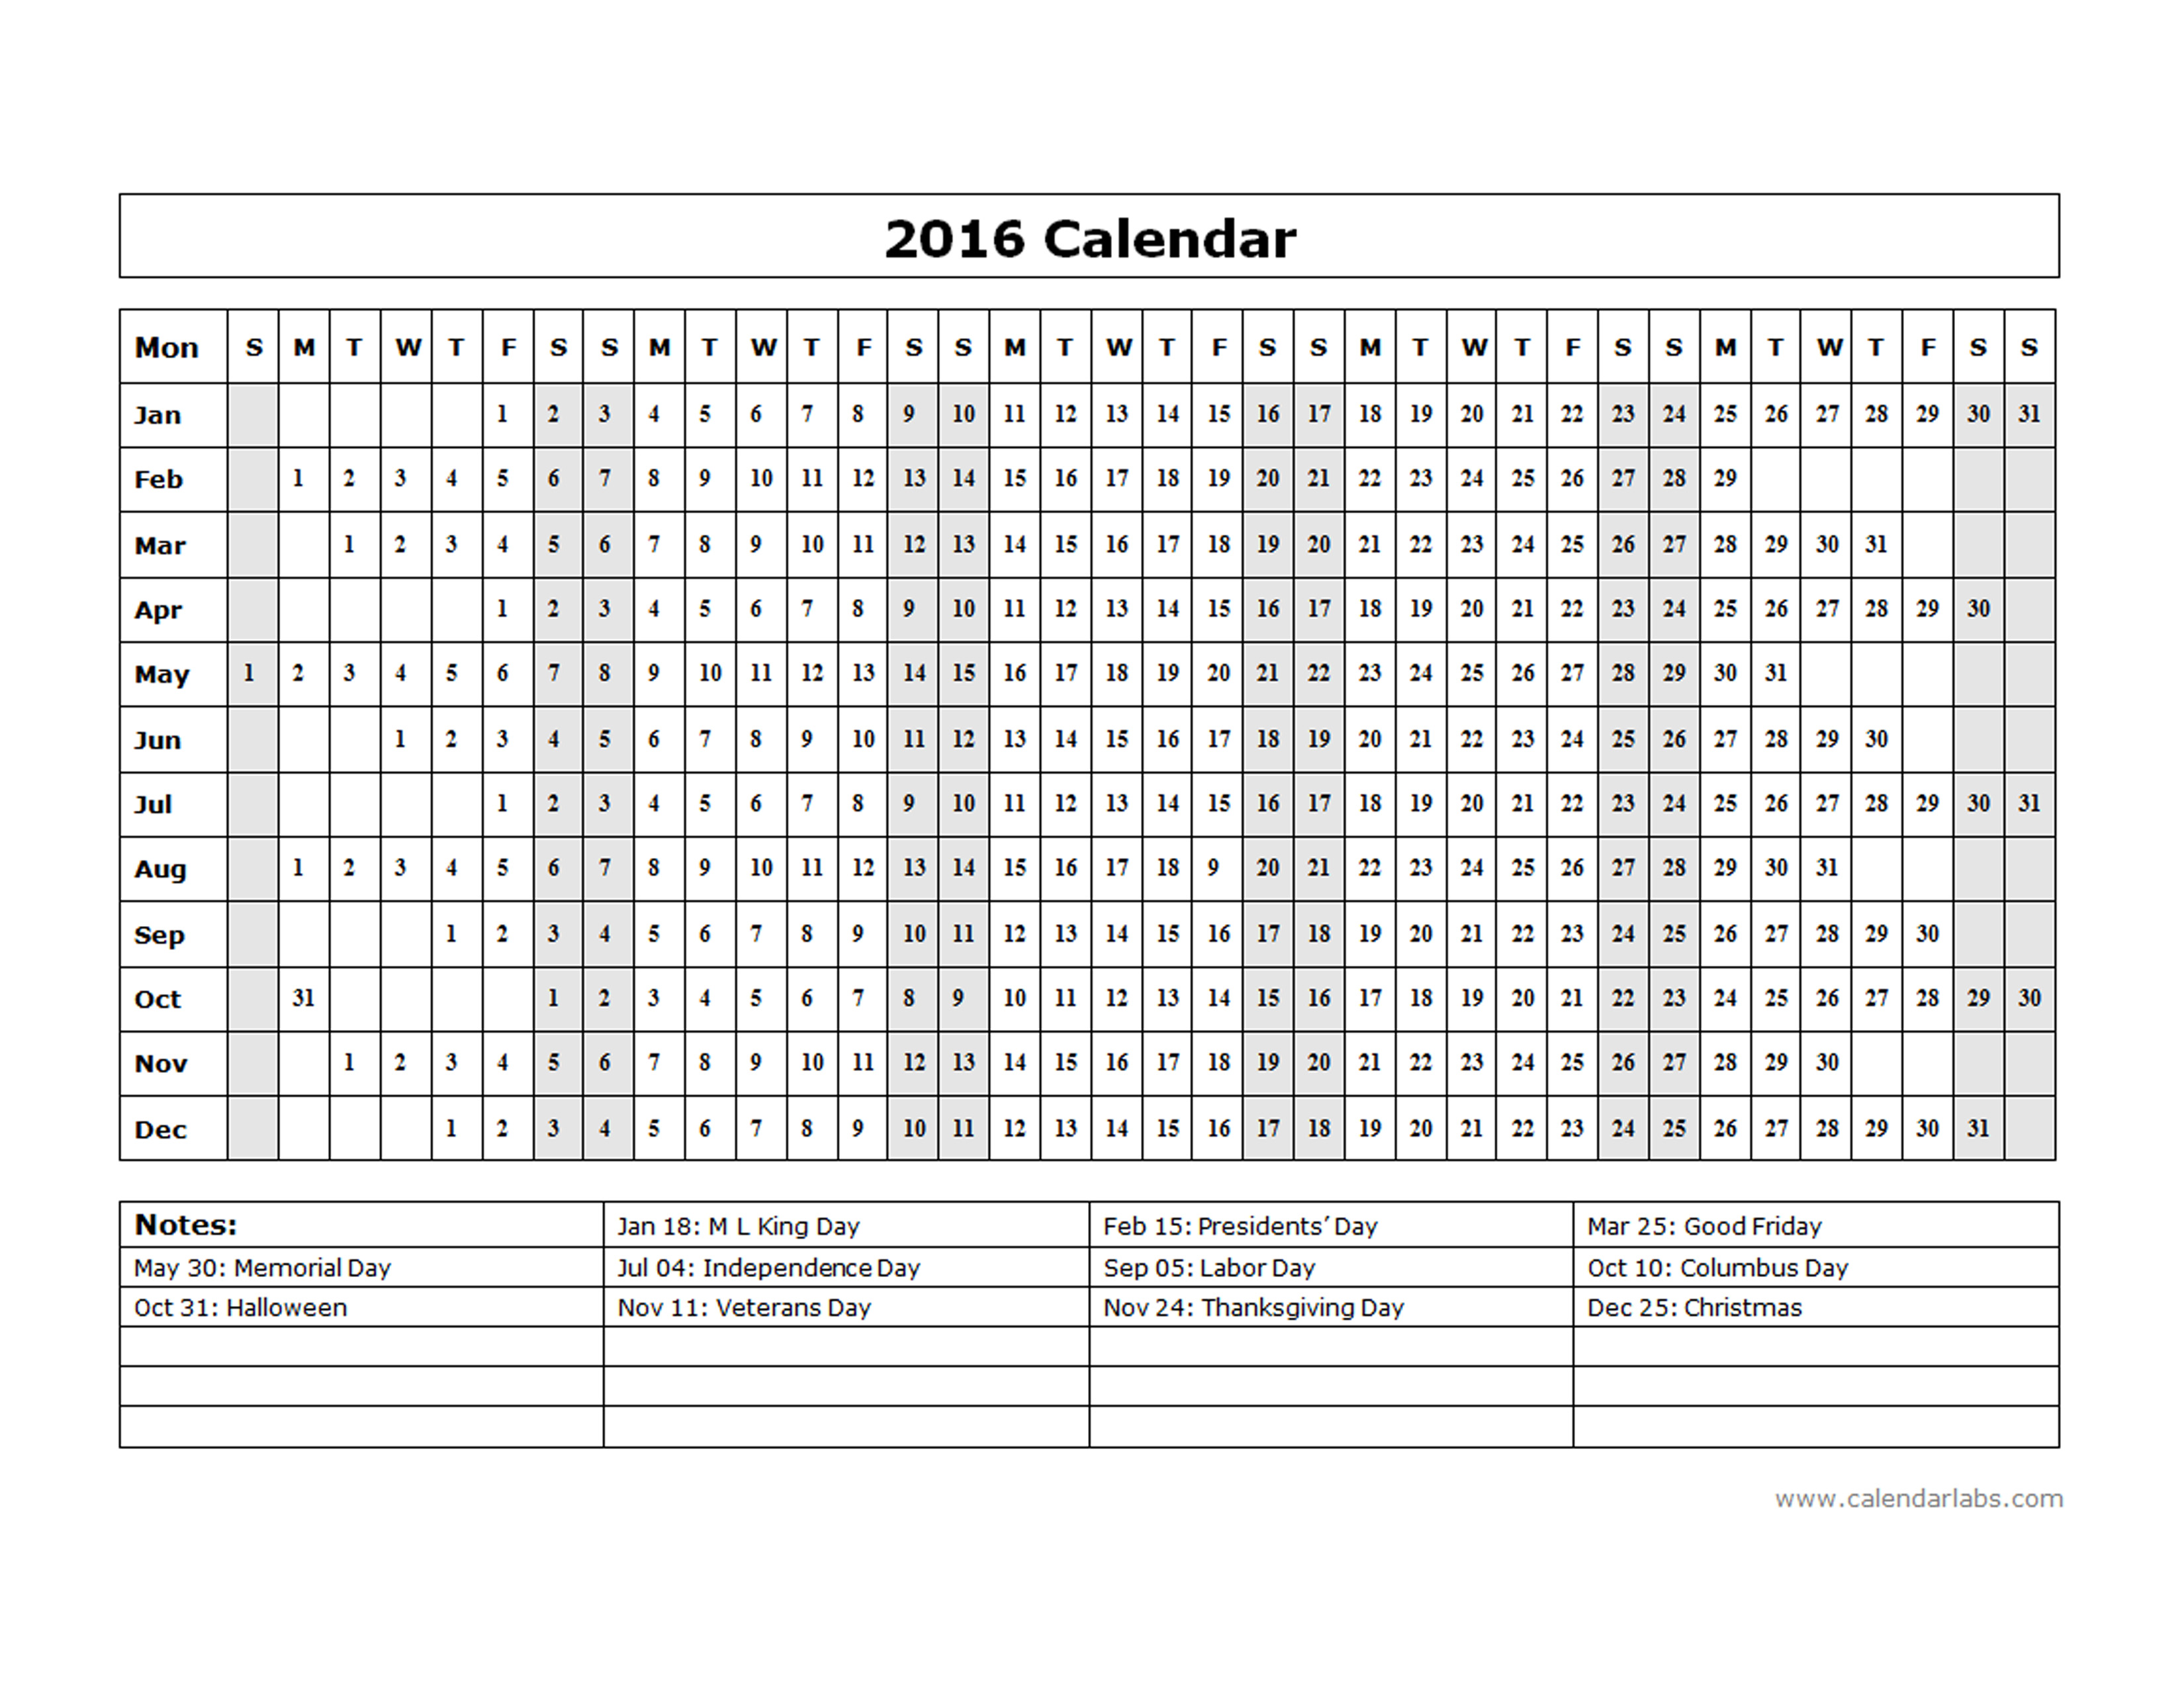 2016 Yearly Calendar Template 15L - Free Printable Templates3300 x 2550